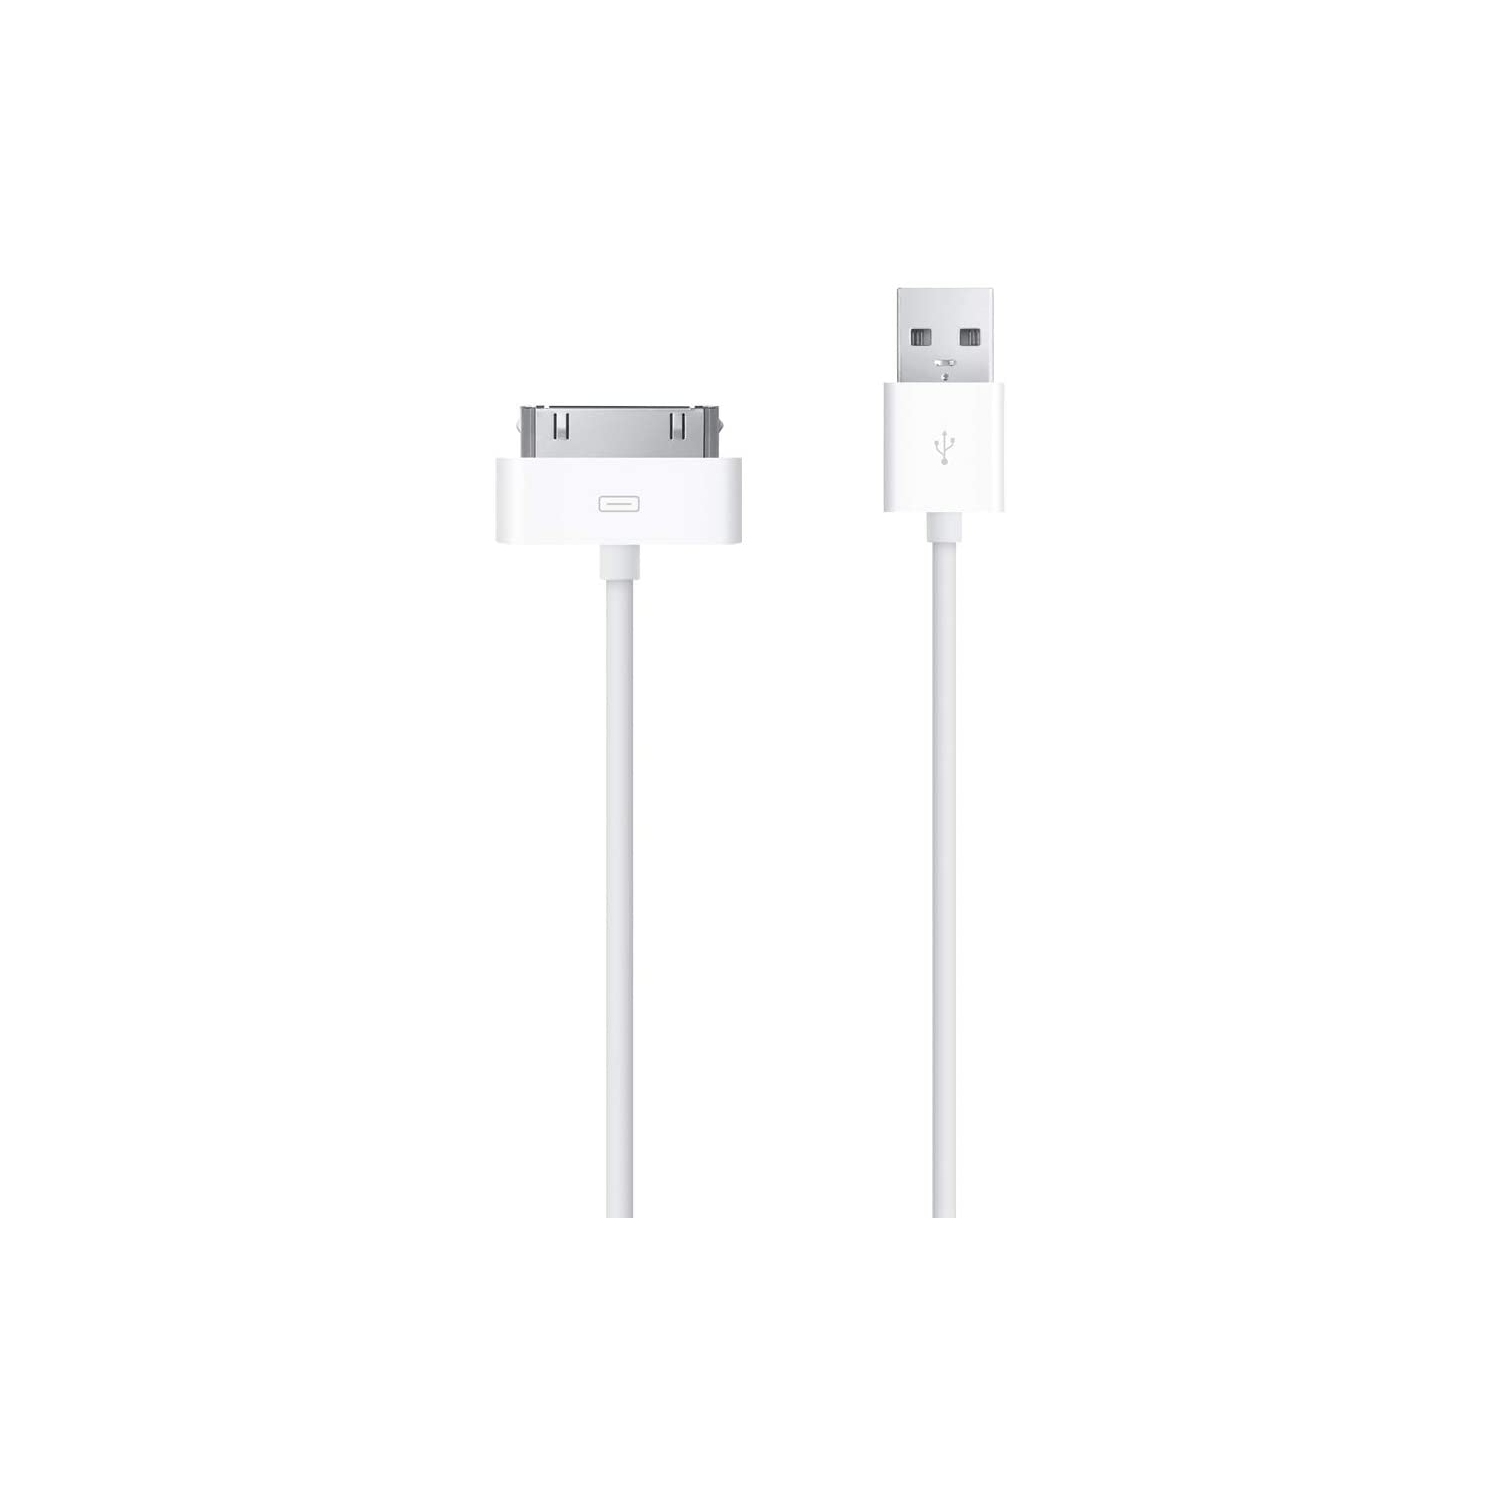 Free Shipping! HYFAI Apple iPhone 4 4s iPad 1 2 3 iPod Touch Nano 30 Pin Charger USB Sync Cable Charging Cord, 3 ft/ 1m